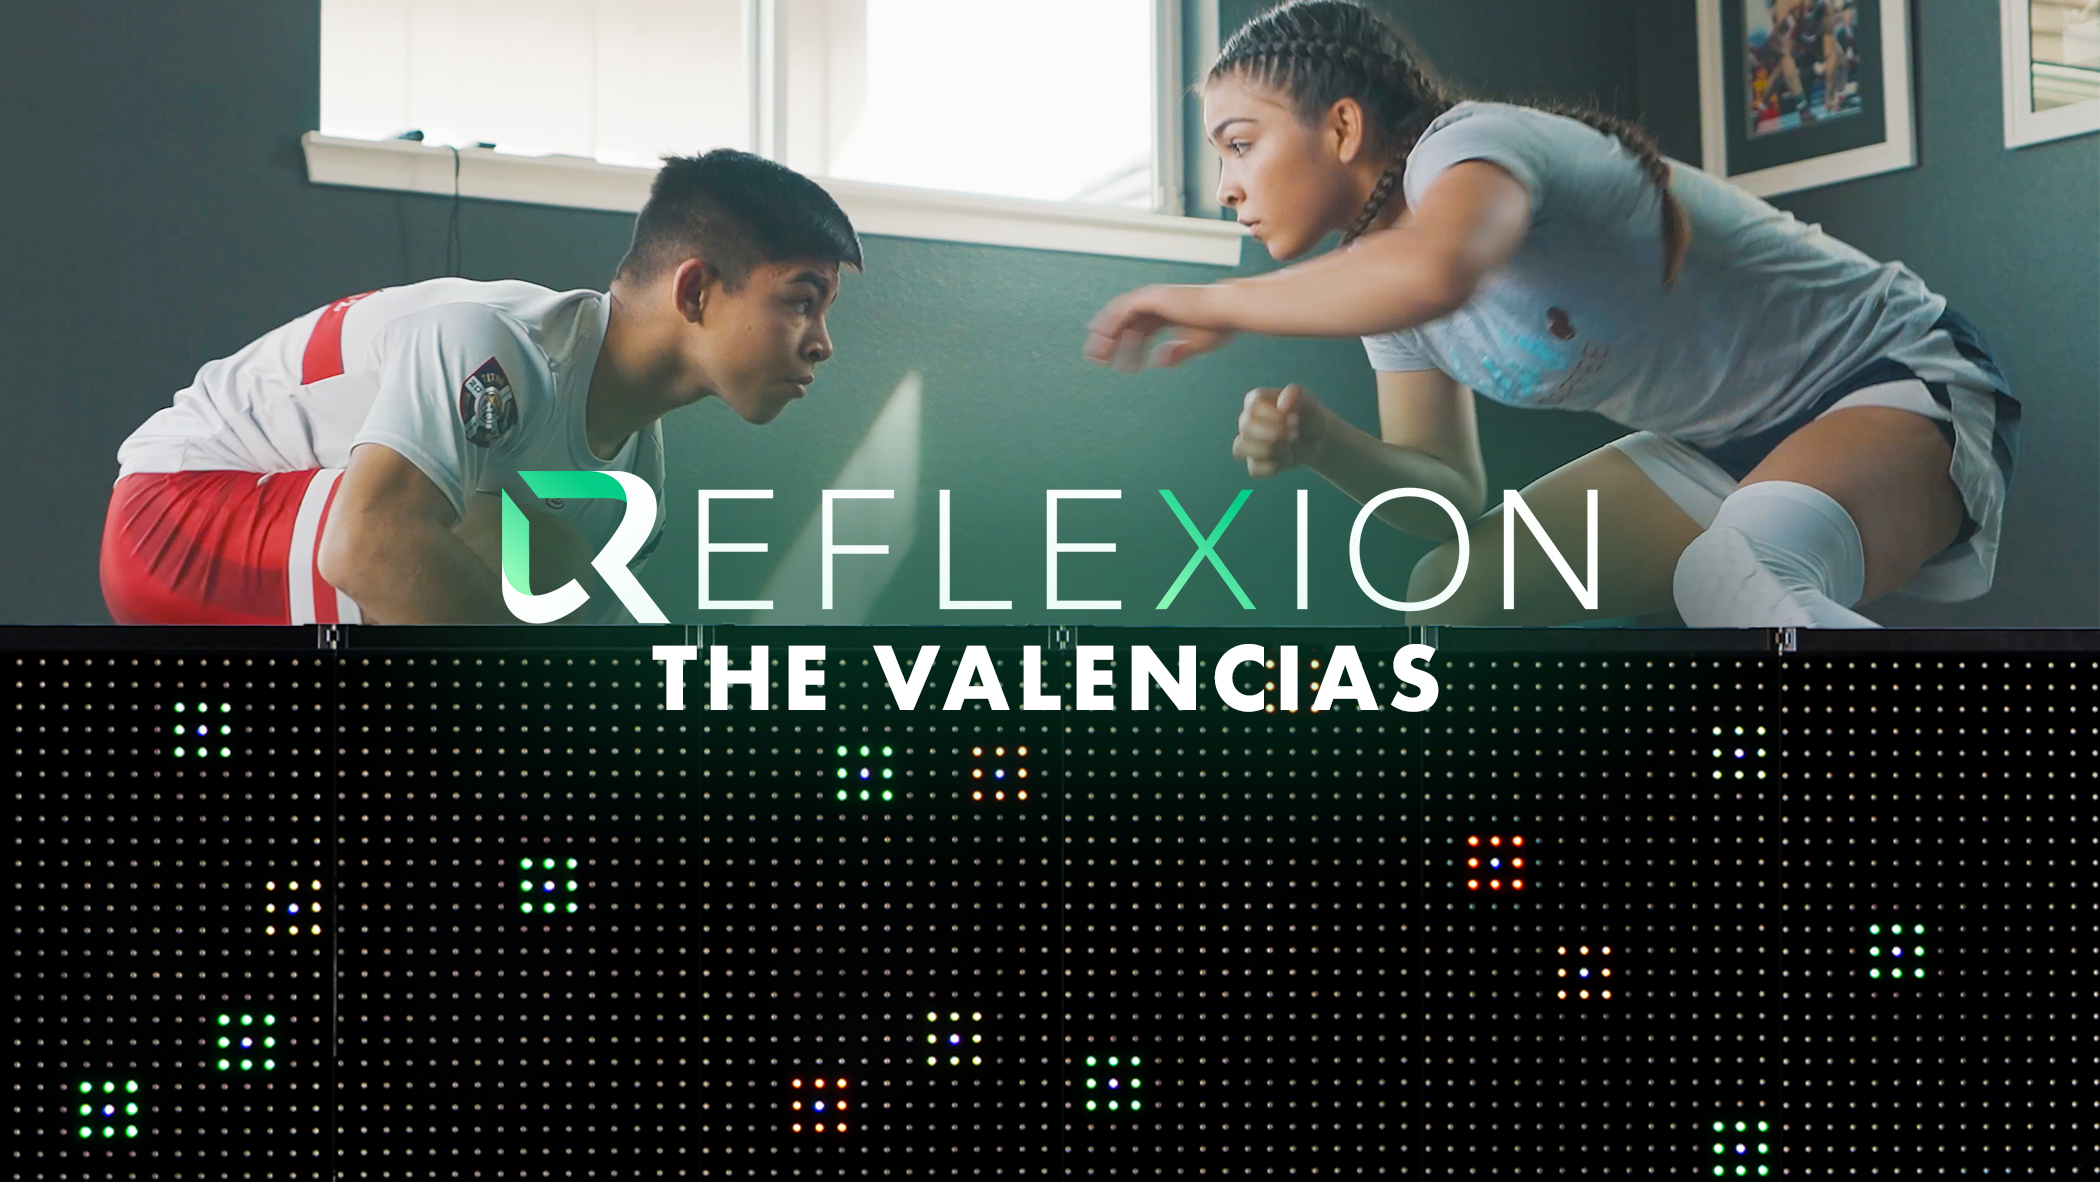 Going for the Gold With the Valencias and the Reflexion Edge